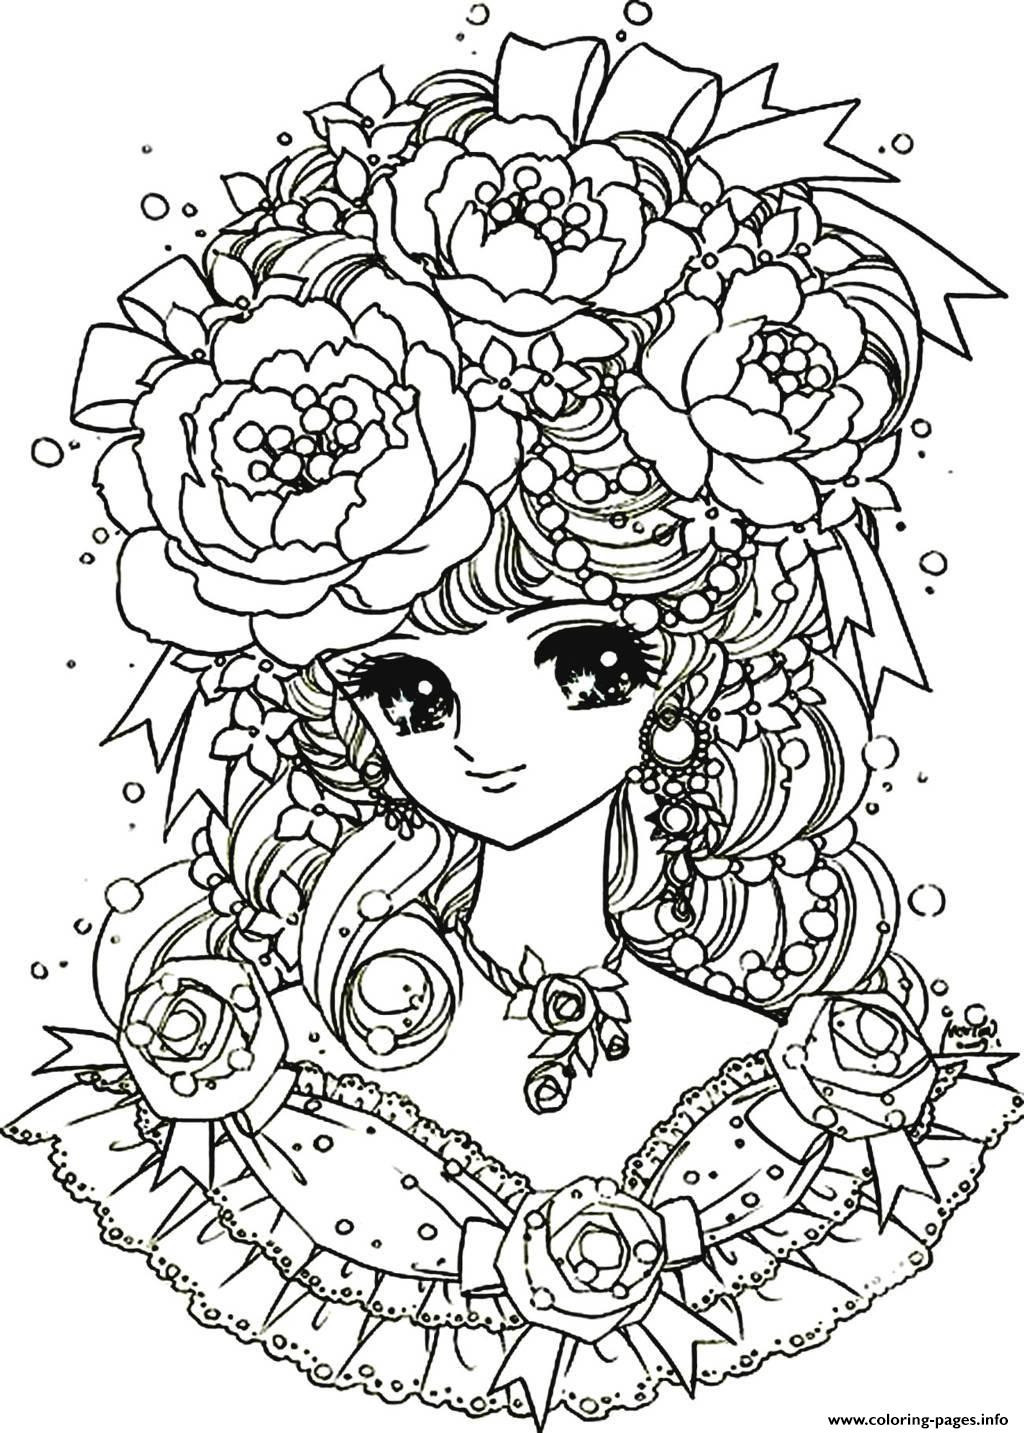 Free Coloring Pages For Girls Flowers
 Flower Coloring Pages For Girls Gorgeous Full Page And 12